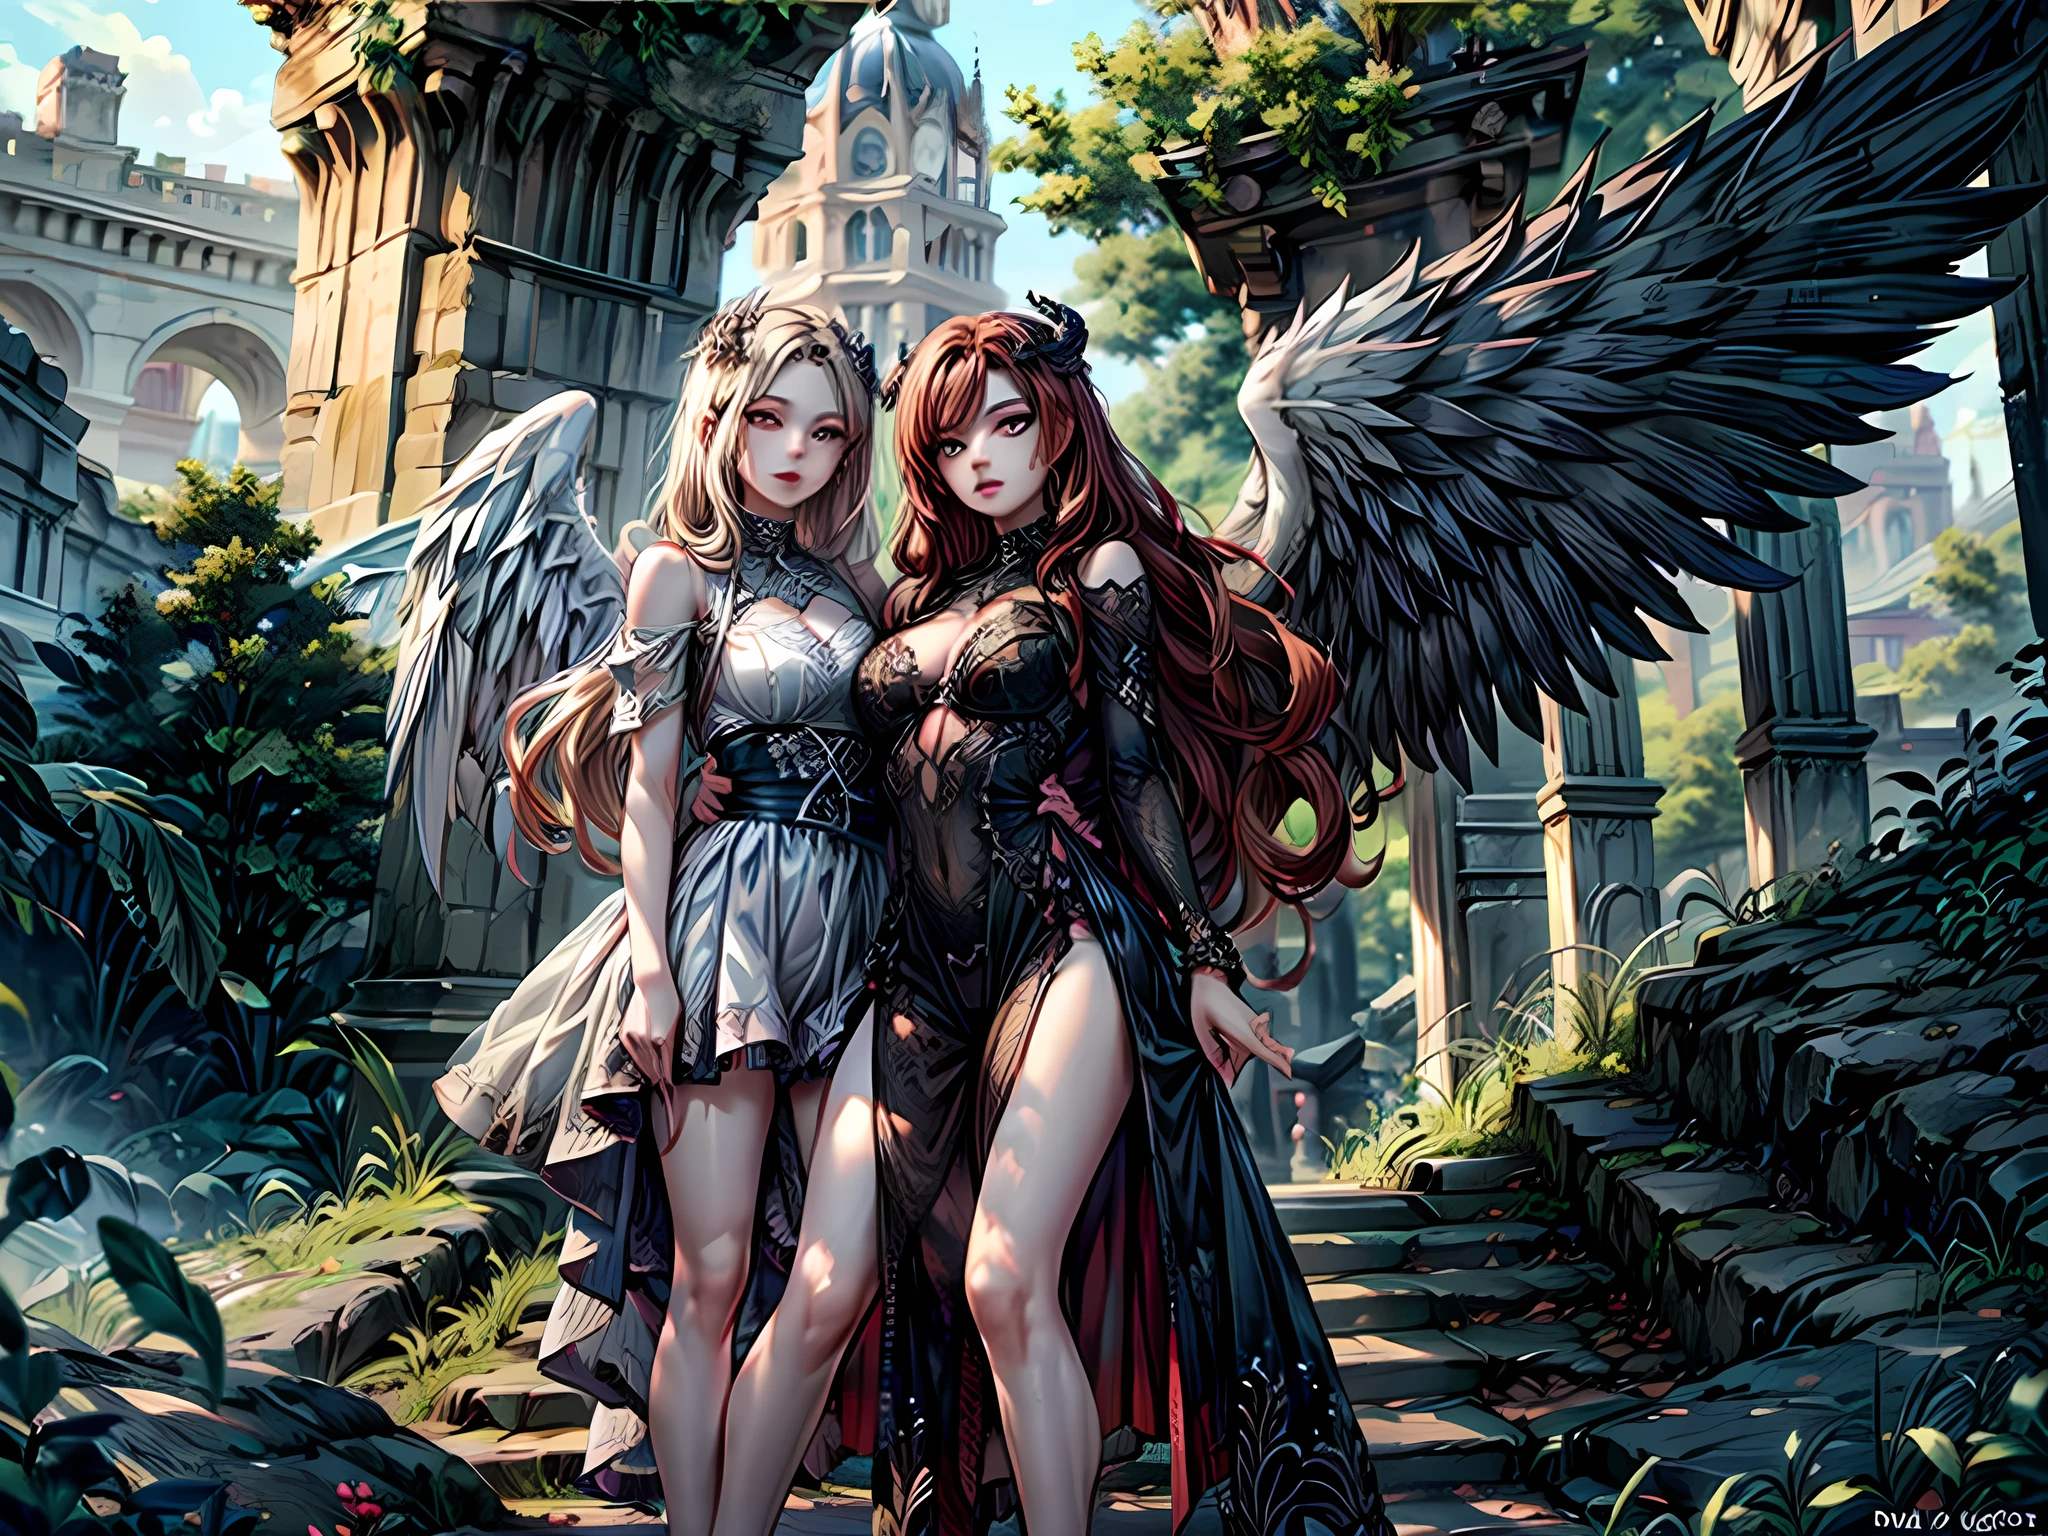 fantasy art, RPG art [[a picture of 2 women]], , a female angel (Masterpiece, 1.3, intricate details), wearing dress, pale skin, best details beautiful face (Masterpiece, 1.3, intricate details), blond hair, long hair wavy hair (Masterpiece, 1.3, intricate details), blue eyes, high heeled boots, wearing a dress (Masterpiece: 1.3, intricate details), large angelic wings, white angel_wings spread [AND] a female demon (Masterpiece, 1.3, intricate details), demon, red skin (Masterpiece, 1.3, intricate details), demon_wings, black demonic wings spread, demonic horns (Masterpiece, 1.3), red skin (Masterpiece, 1.3), black hair, red eyes, best details beautiful face (Masterpiece, 1.3, intricate details), wearing a dress (Masterpiece: 1.3, intricate details), high heels, in the border between heaven and hell, moon, stars, clouds, god rays, soft natural light silhouette, dynamic angle, photorealism, panoramic view (Masterpiece 1.3, intense details) , Wide-Angle, Ultra-Wide